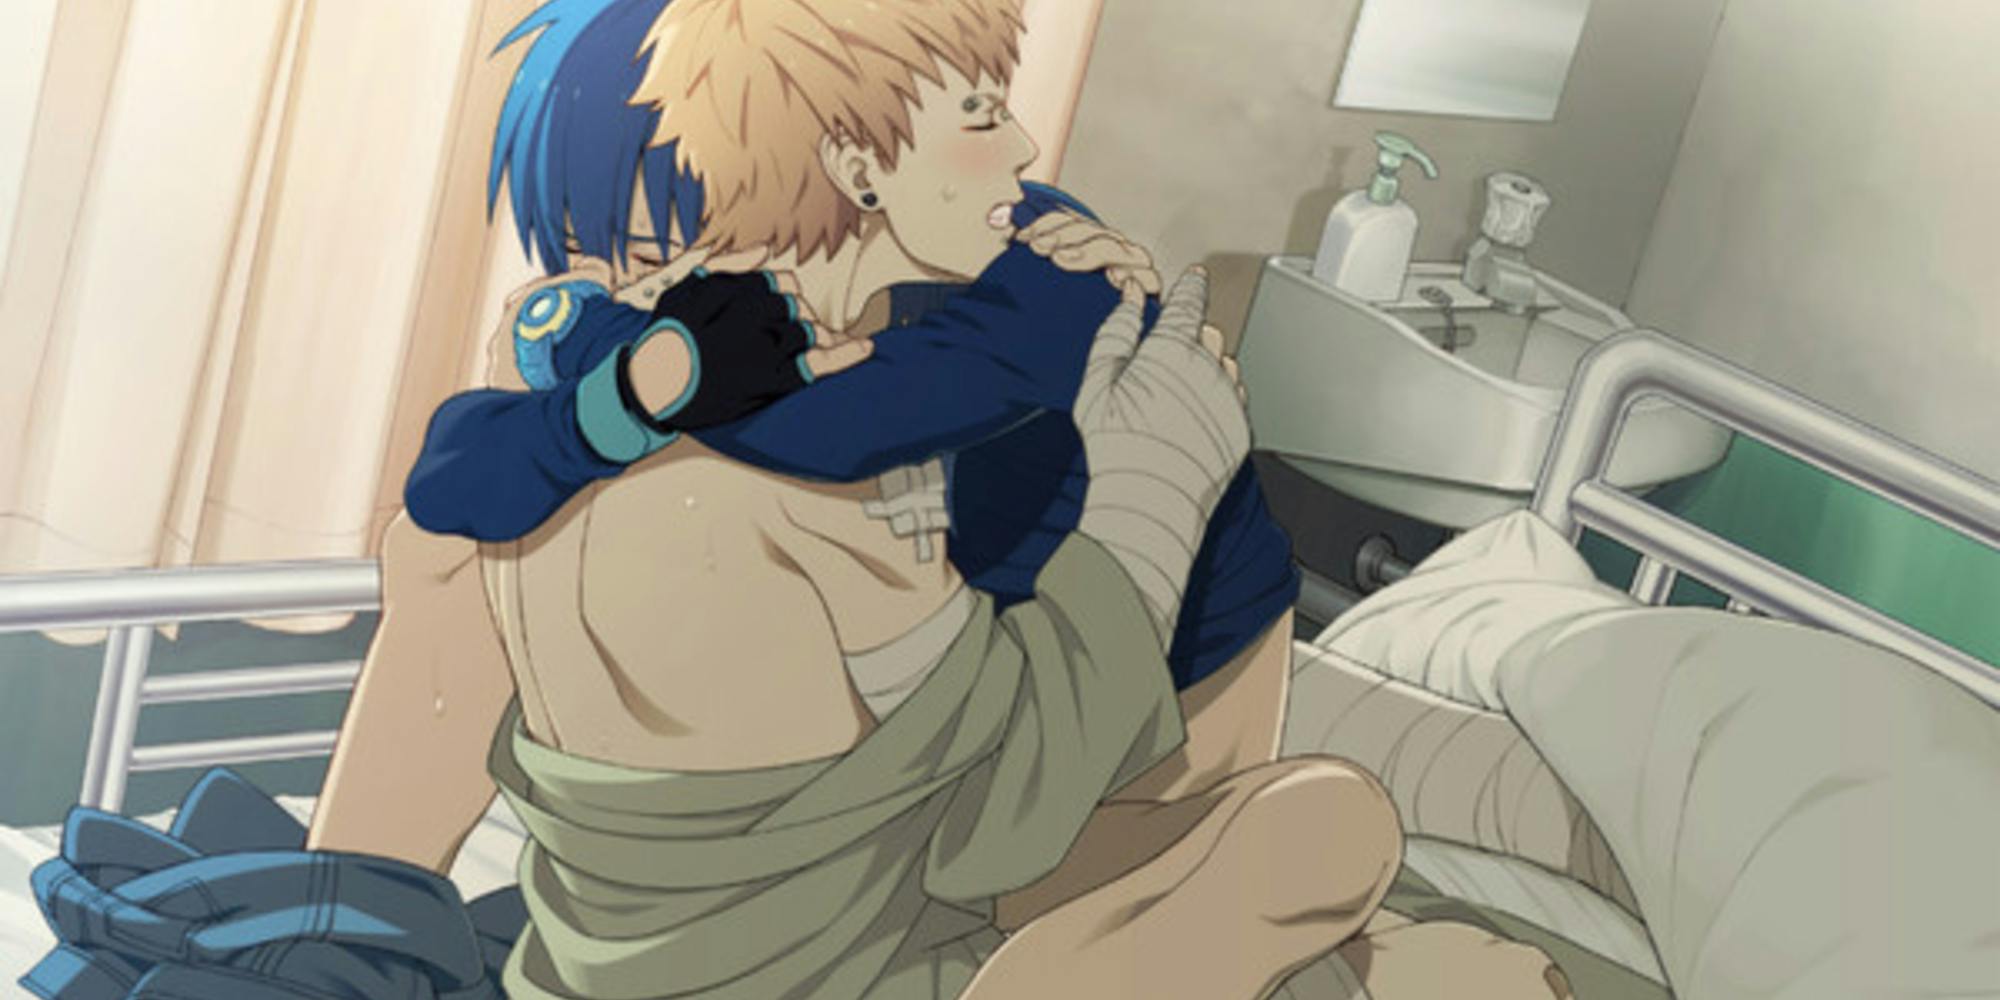 An erotic scene from DRAMAtical Murder